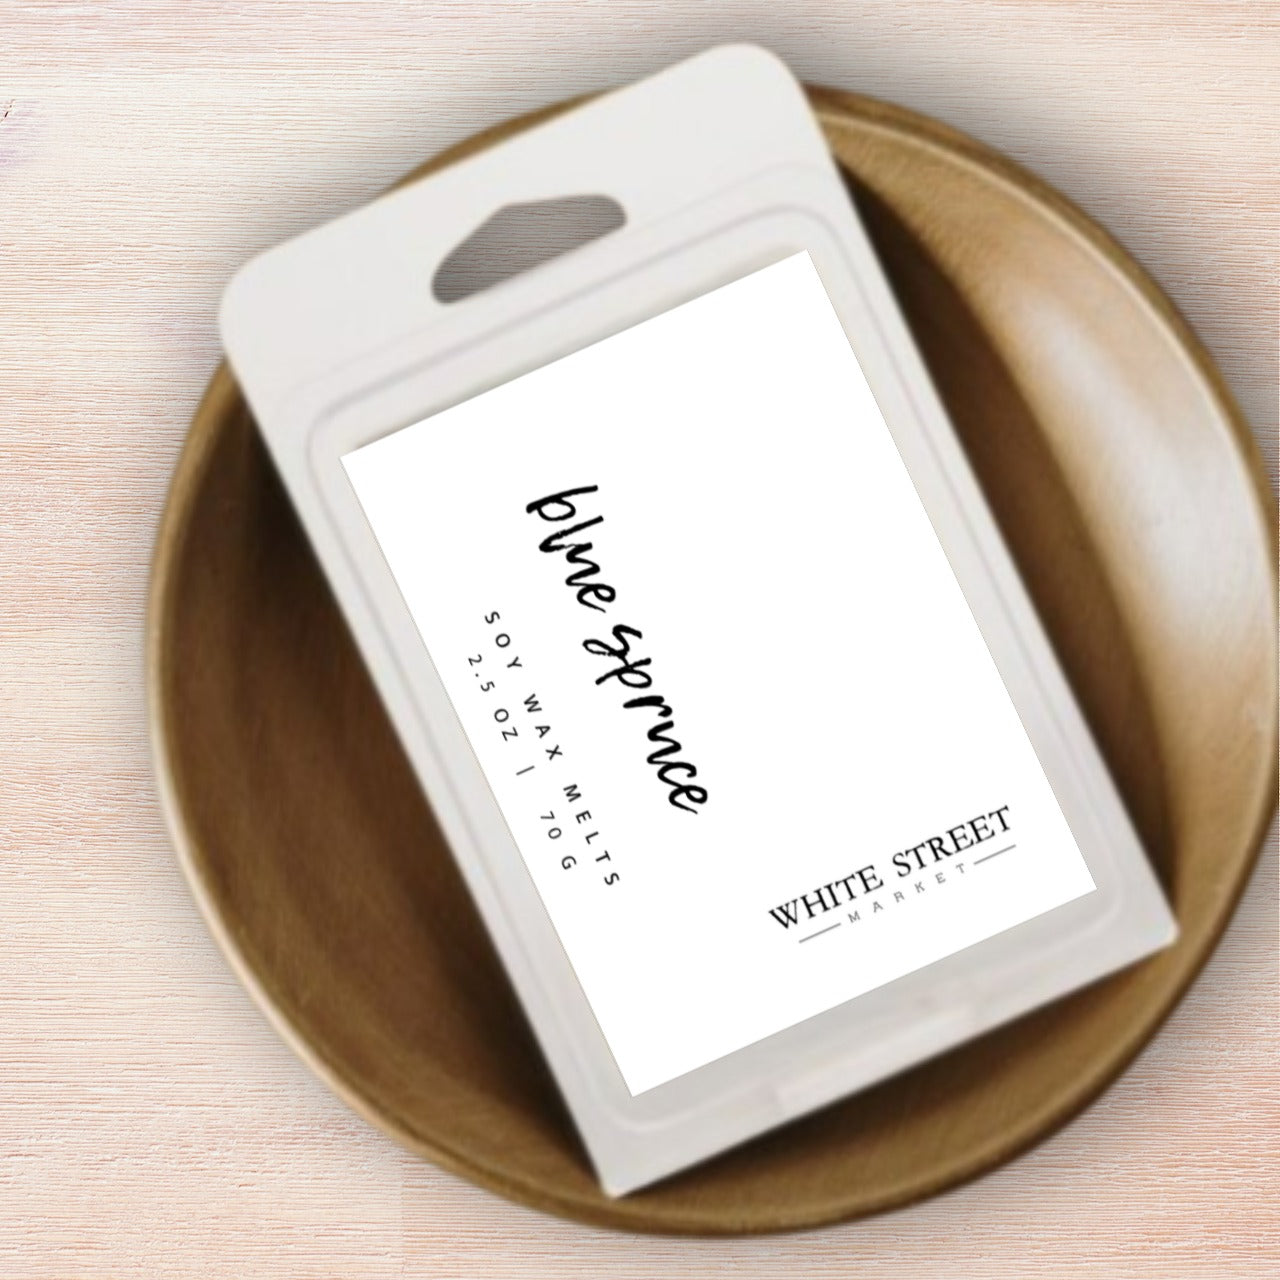 Load image into Gallery viewer, Blue Spruce Wax Melts - White Street Market
